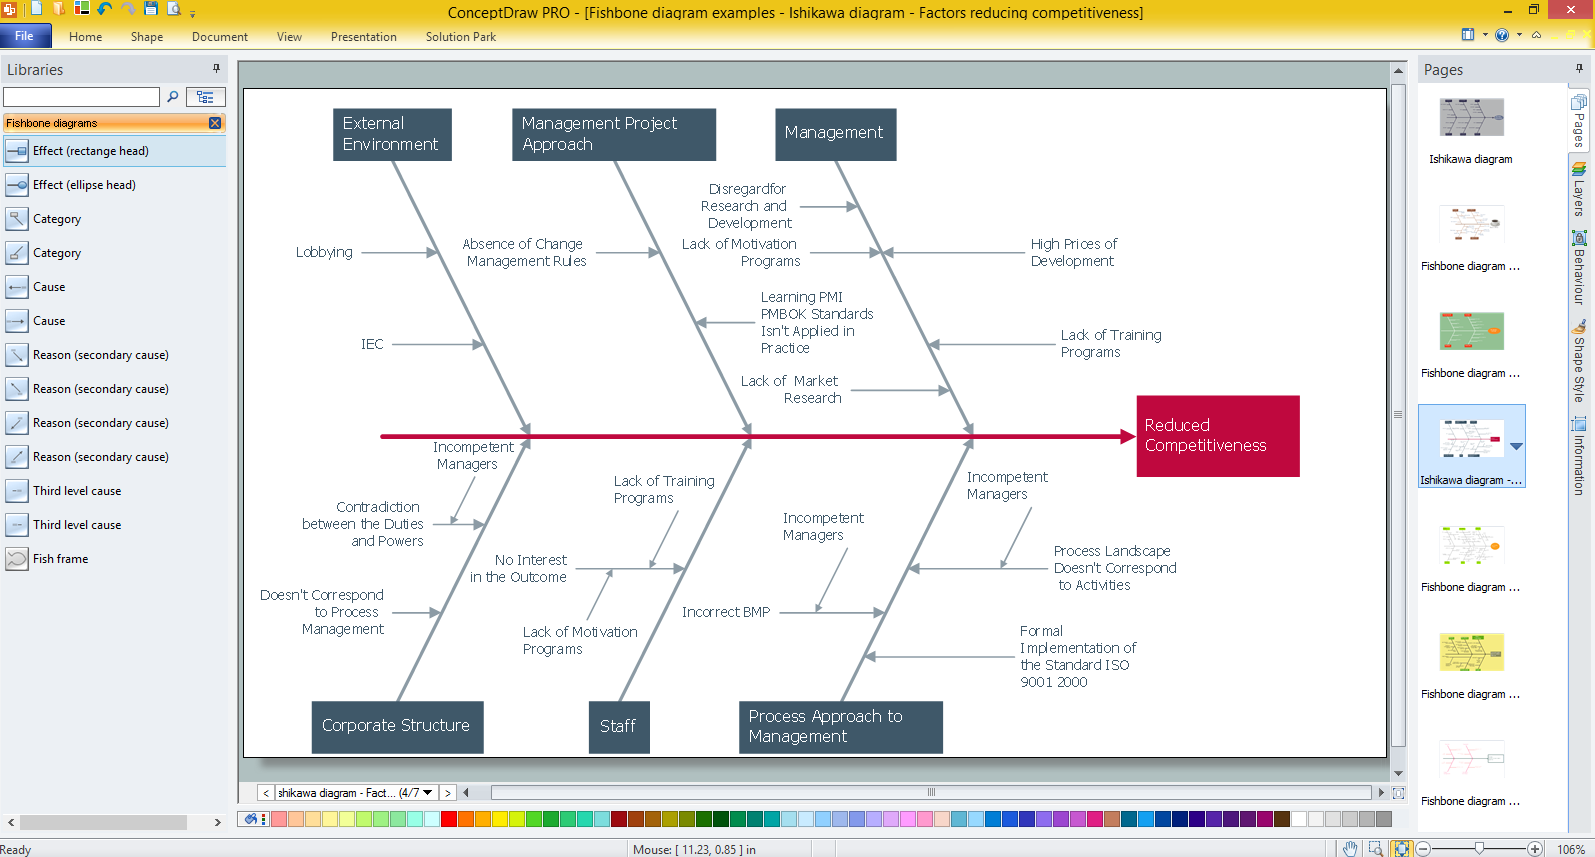 Create Fishbone Diagrams with the ConceptDraw *